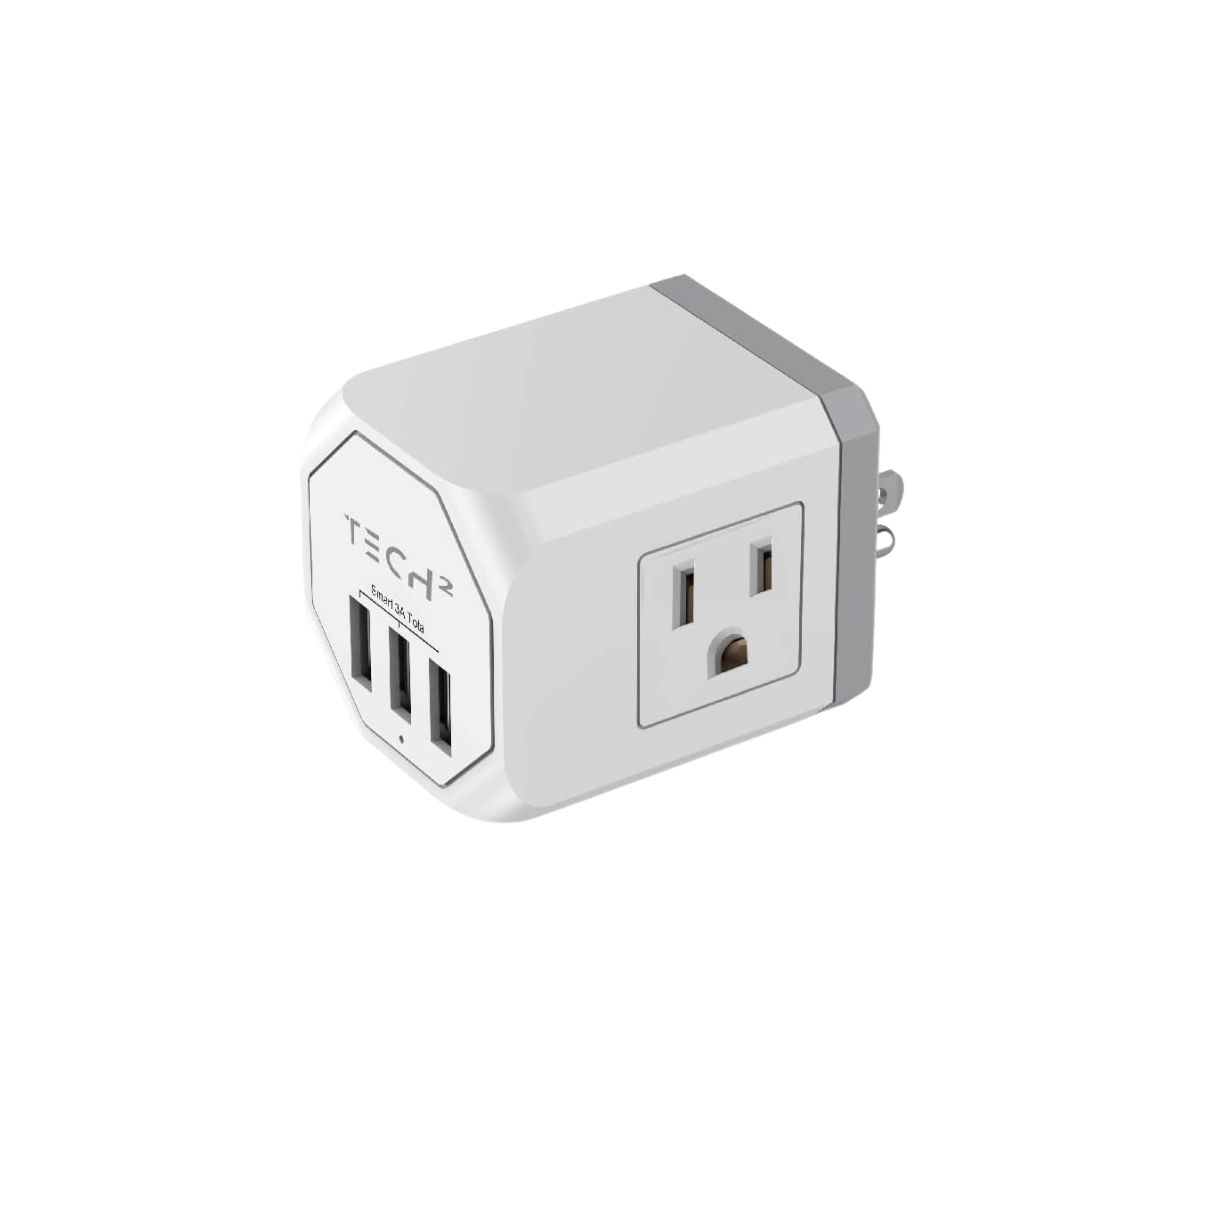 11 Best Cube Surge Protector for 2023